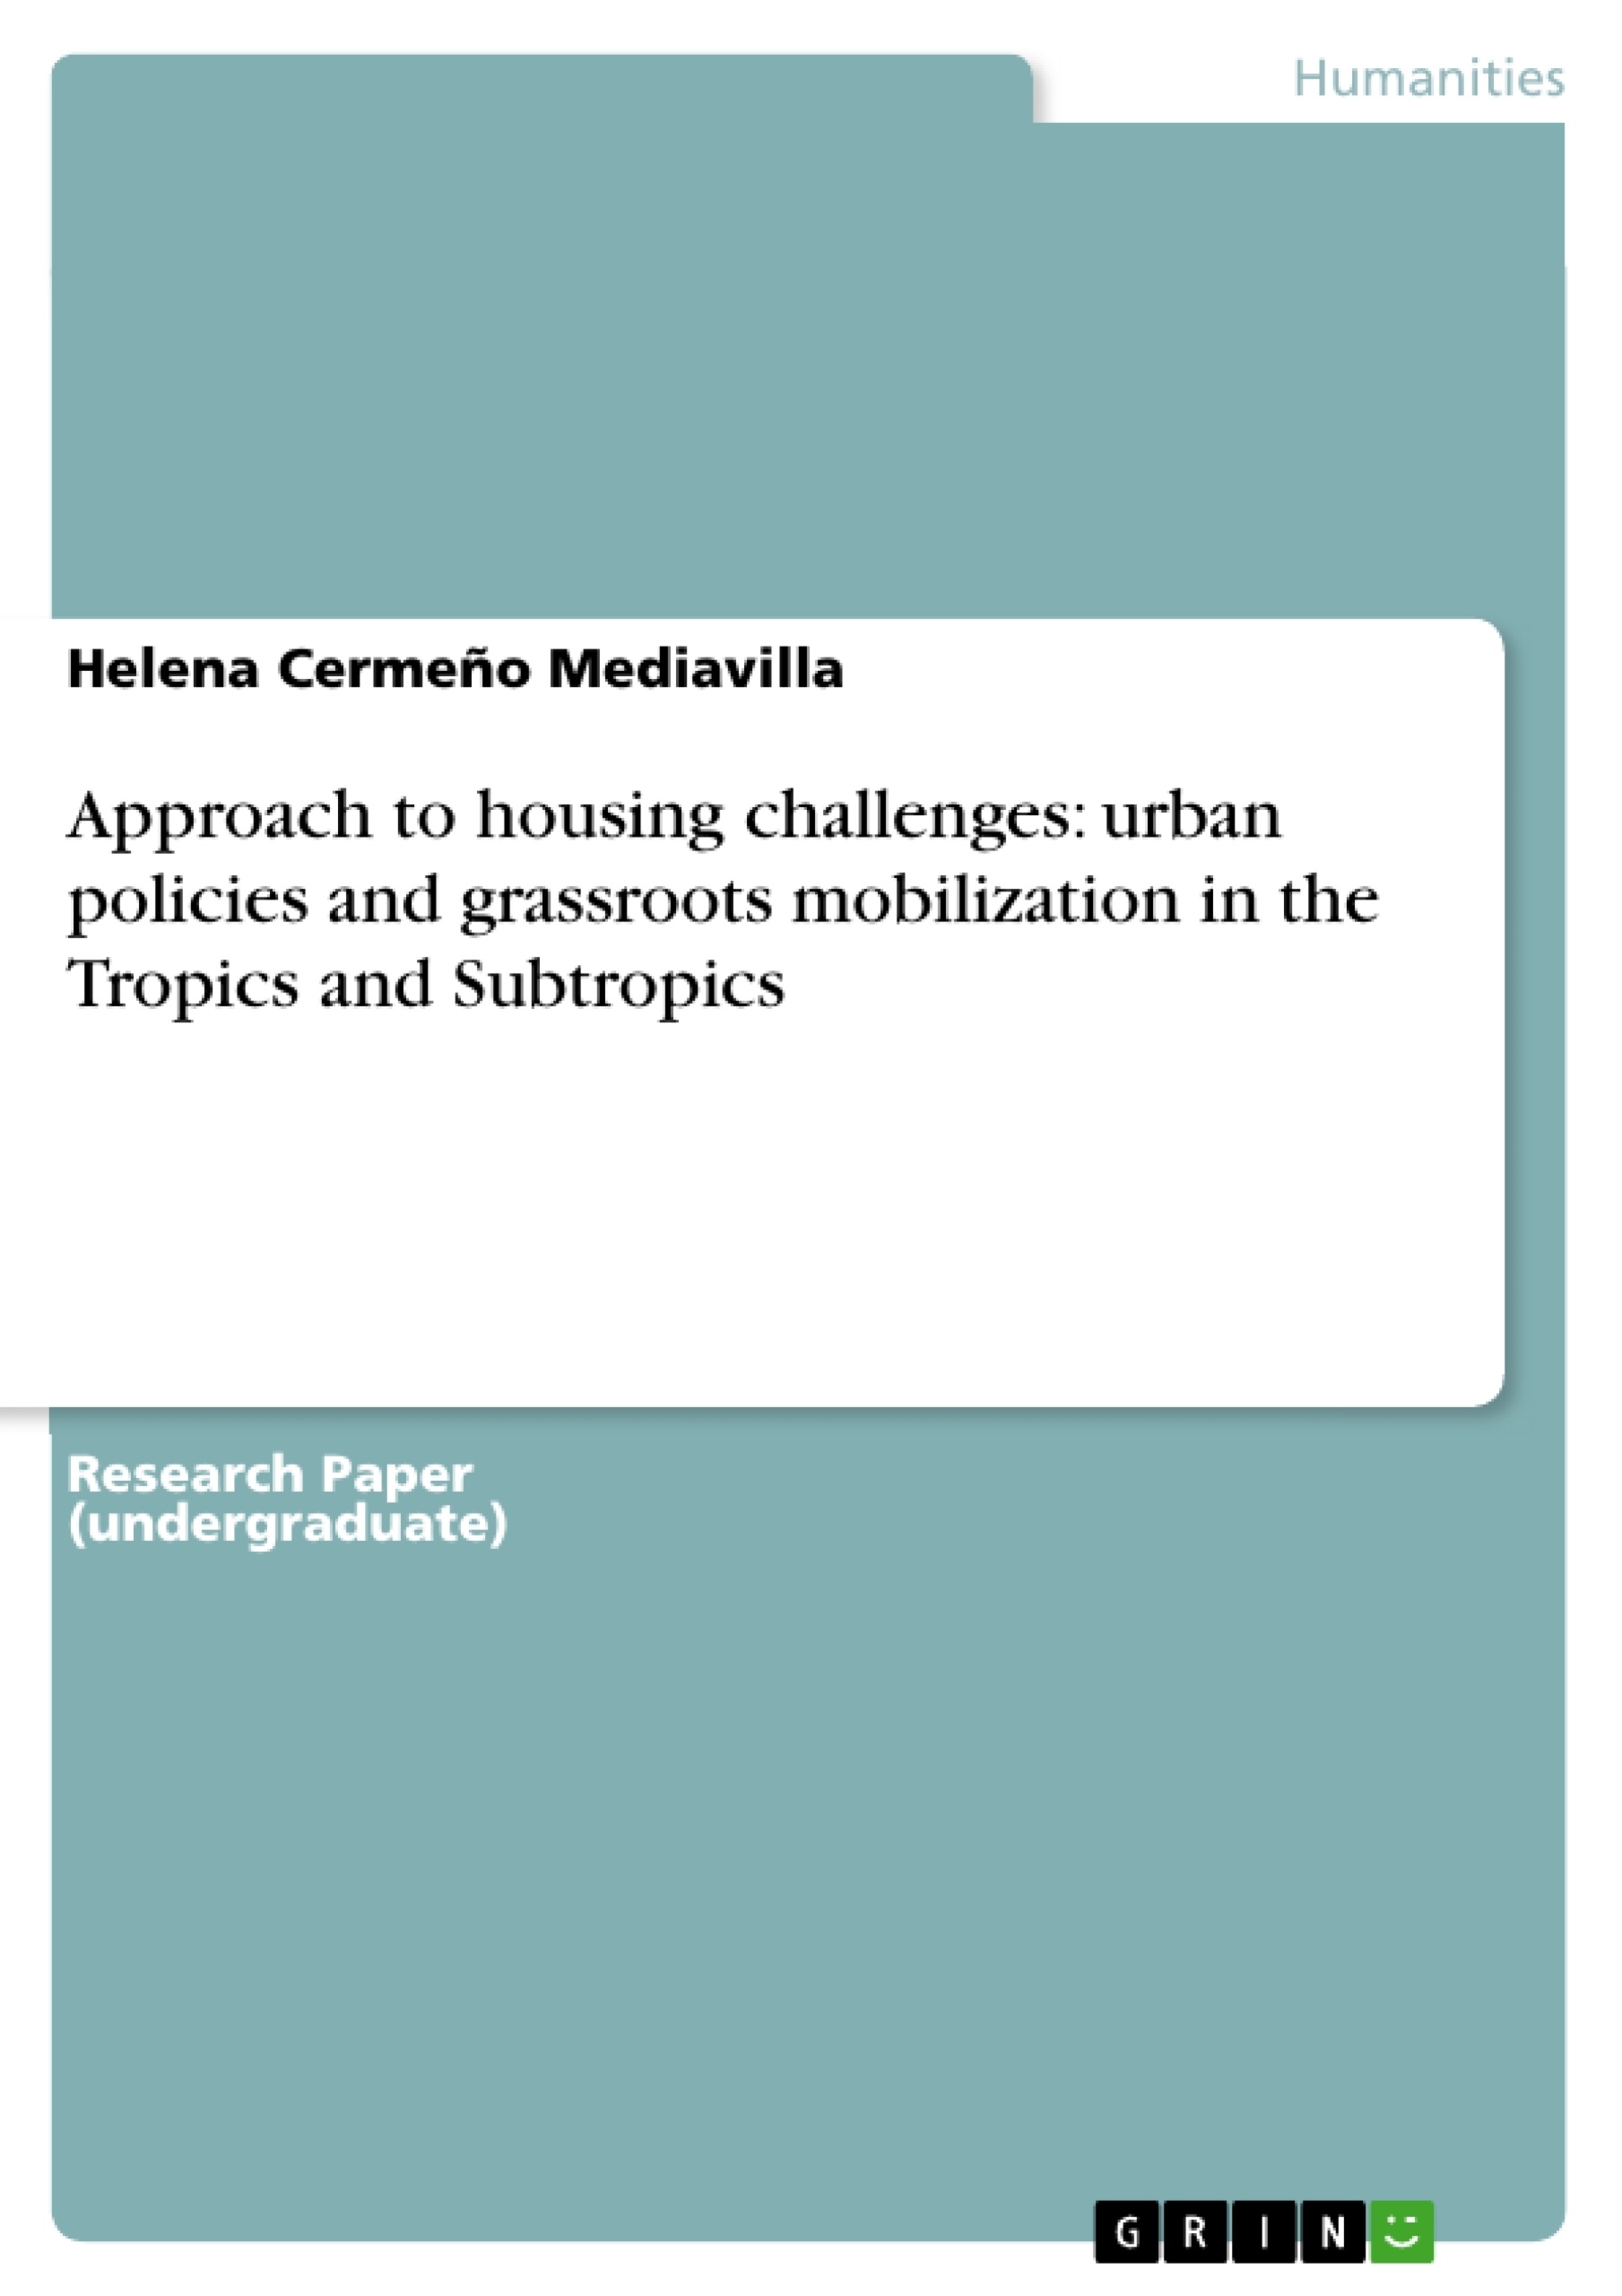 Title: Approach to housing challenges: urban policies and grassroots mobilization  in the Tropics and Subtropics